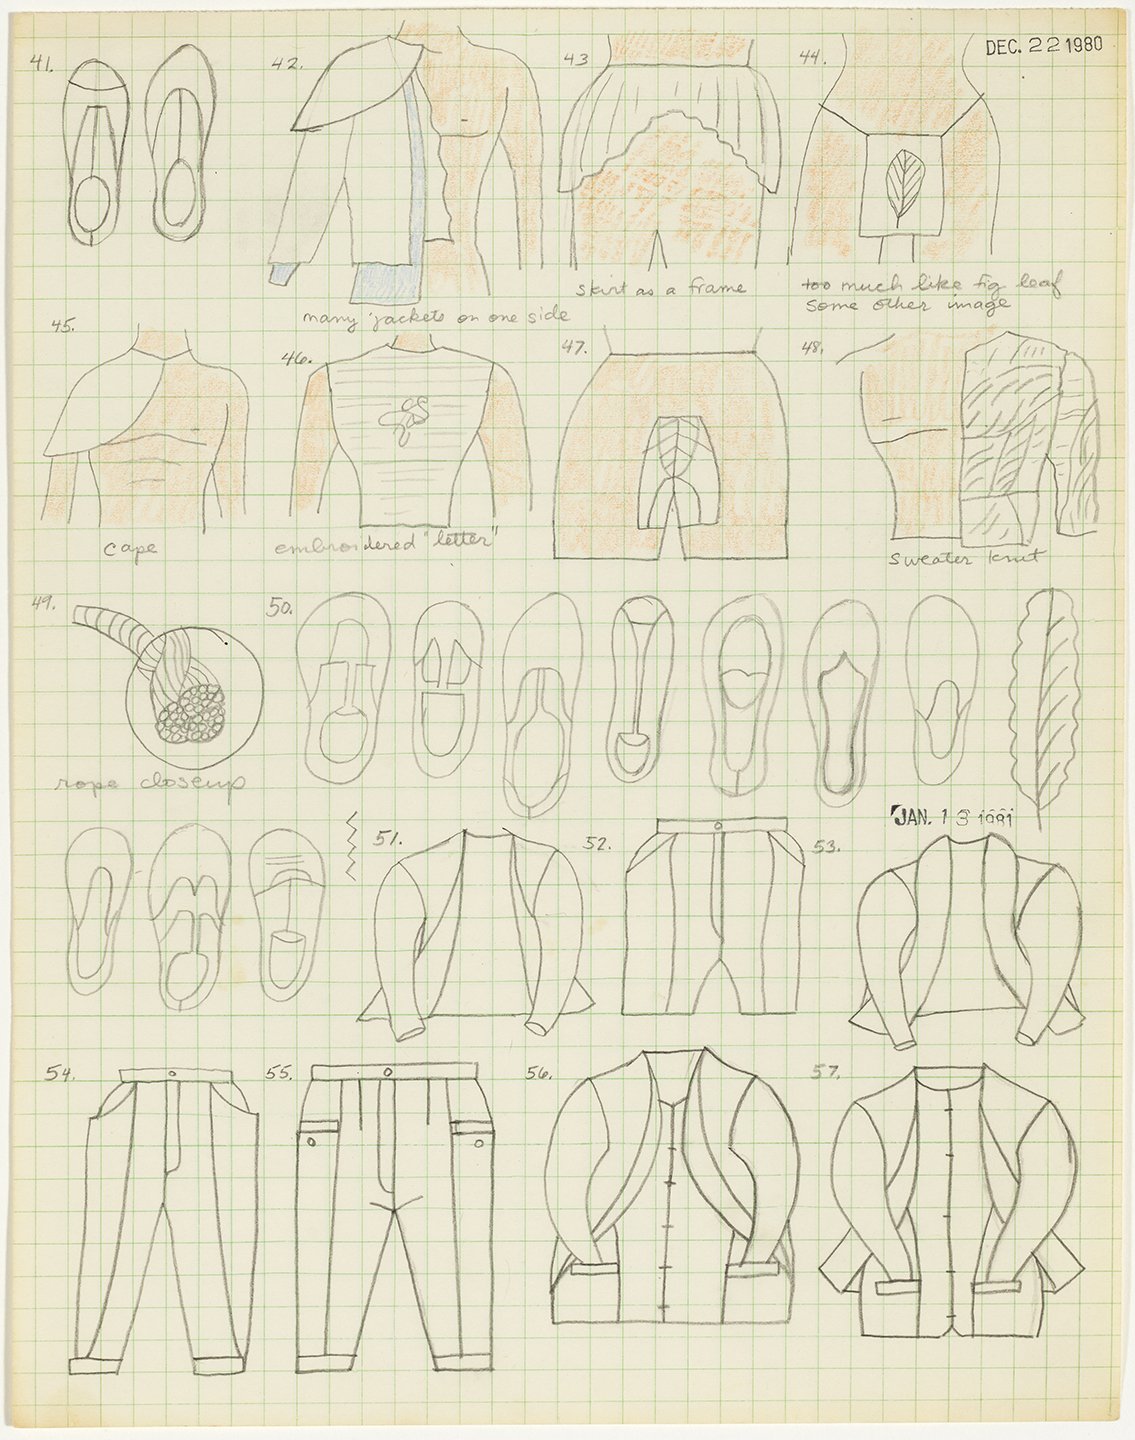  Christina Ramberg,  Untitled (undergarments, shoes, jackets) , c. 1980-81, pencil, colored pencil and date stamp on graph paper, 15 x 12.5 inches (framed). Courtesy of the Estate of Christina Ramberg and Corbett vs. Dempsey, Chicago 